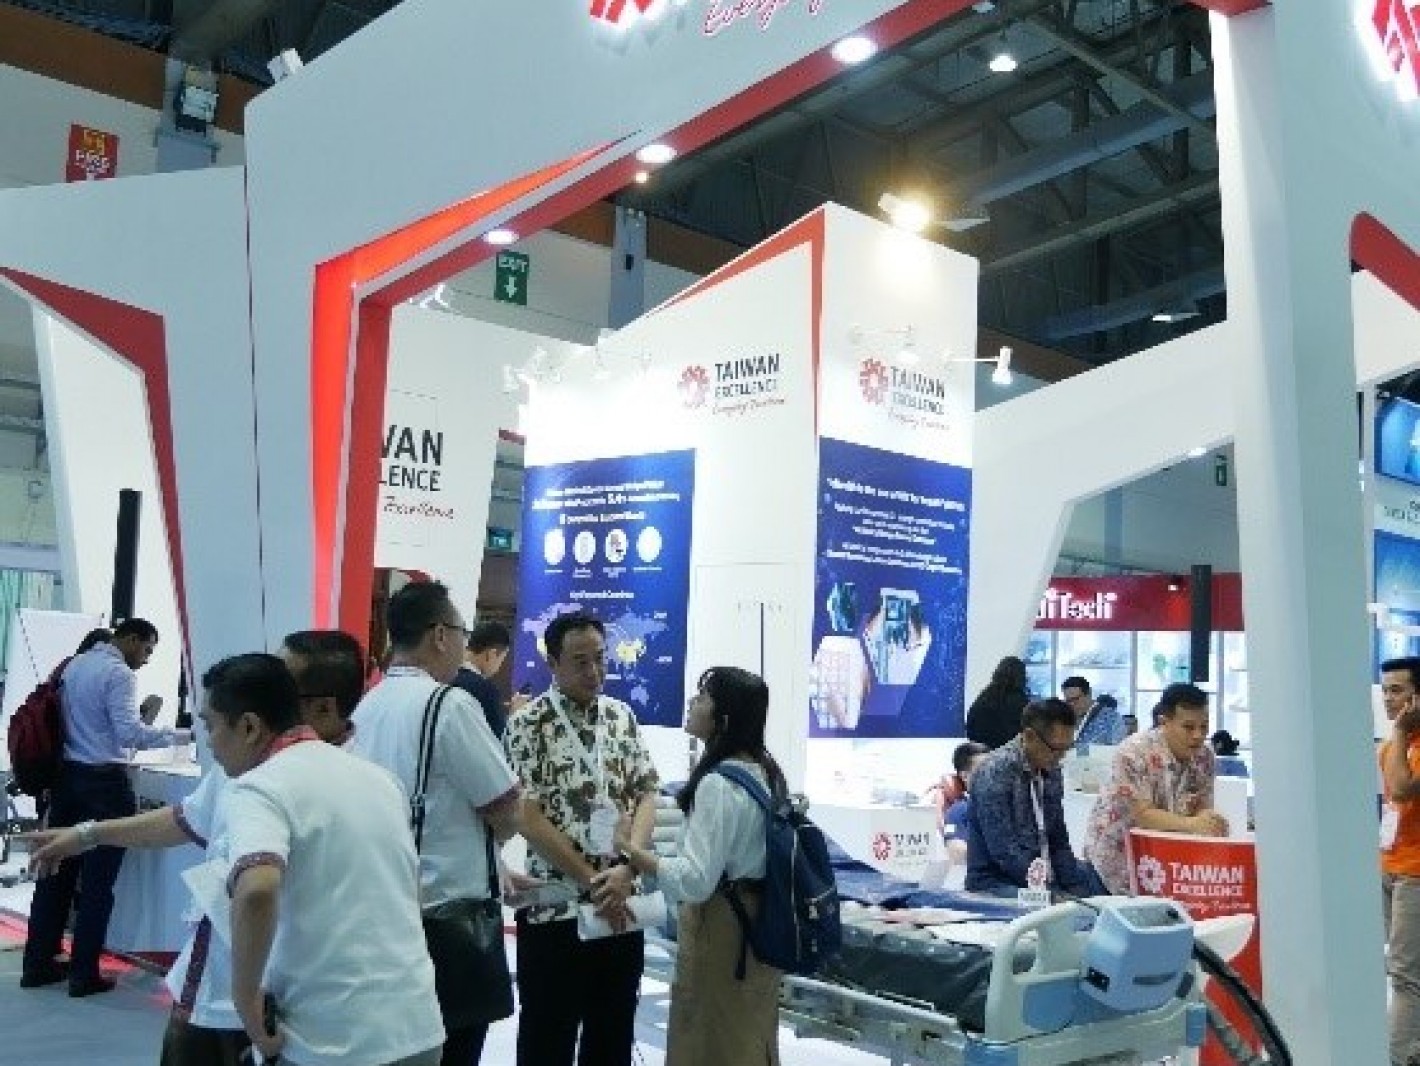 Taiwan Excellence presented the best-made medical products at the 2019 Indonesian Hospital Expo.